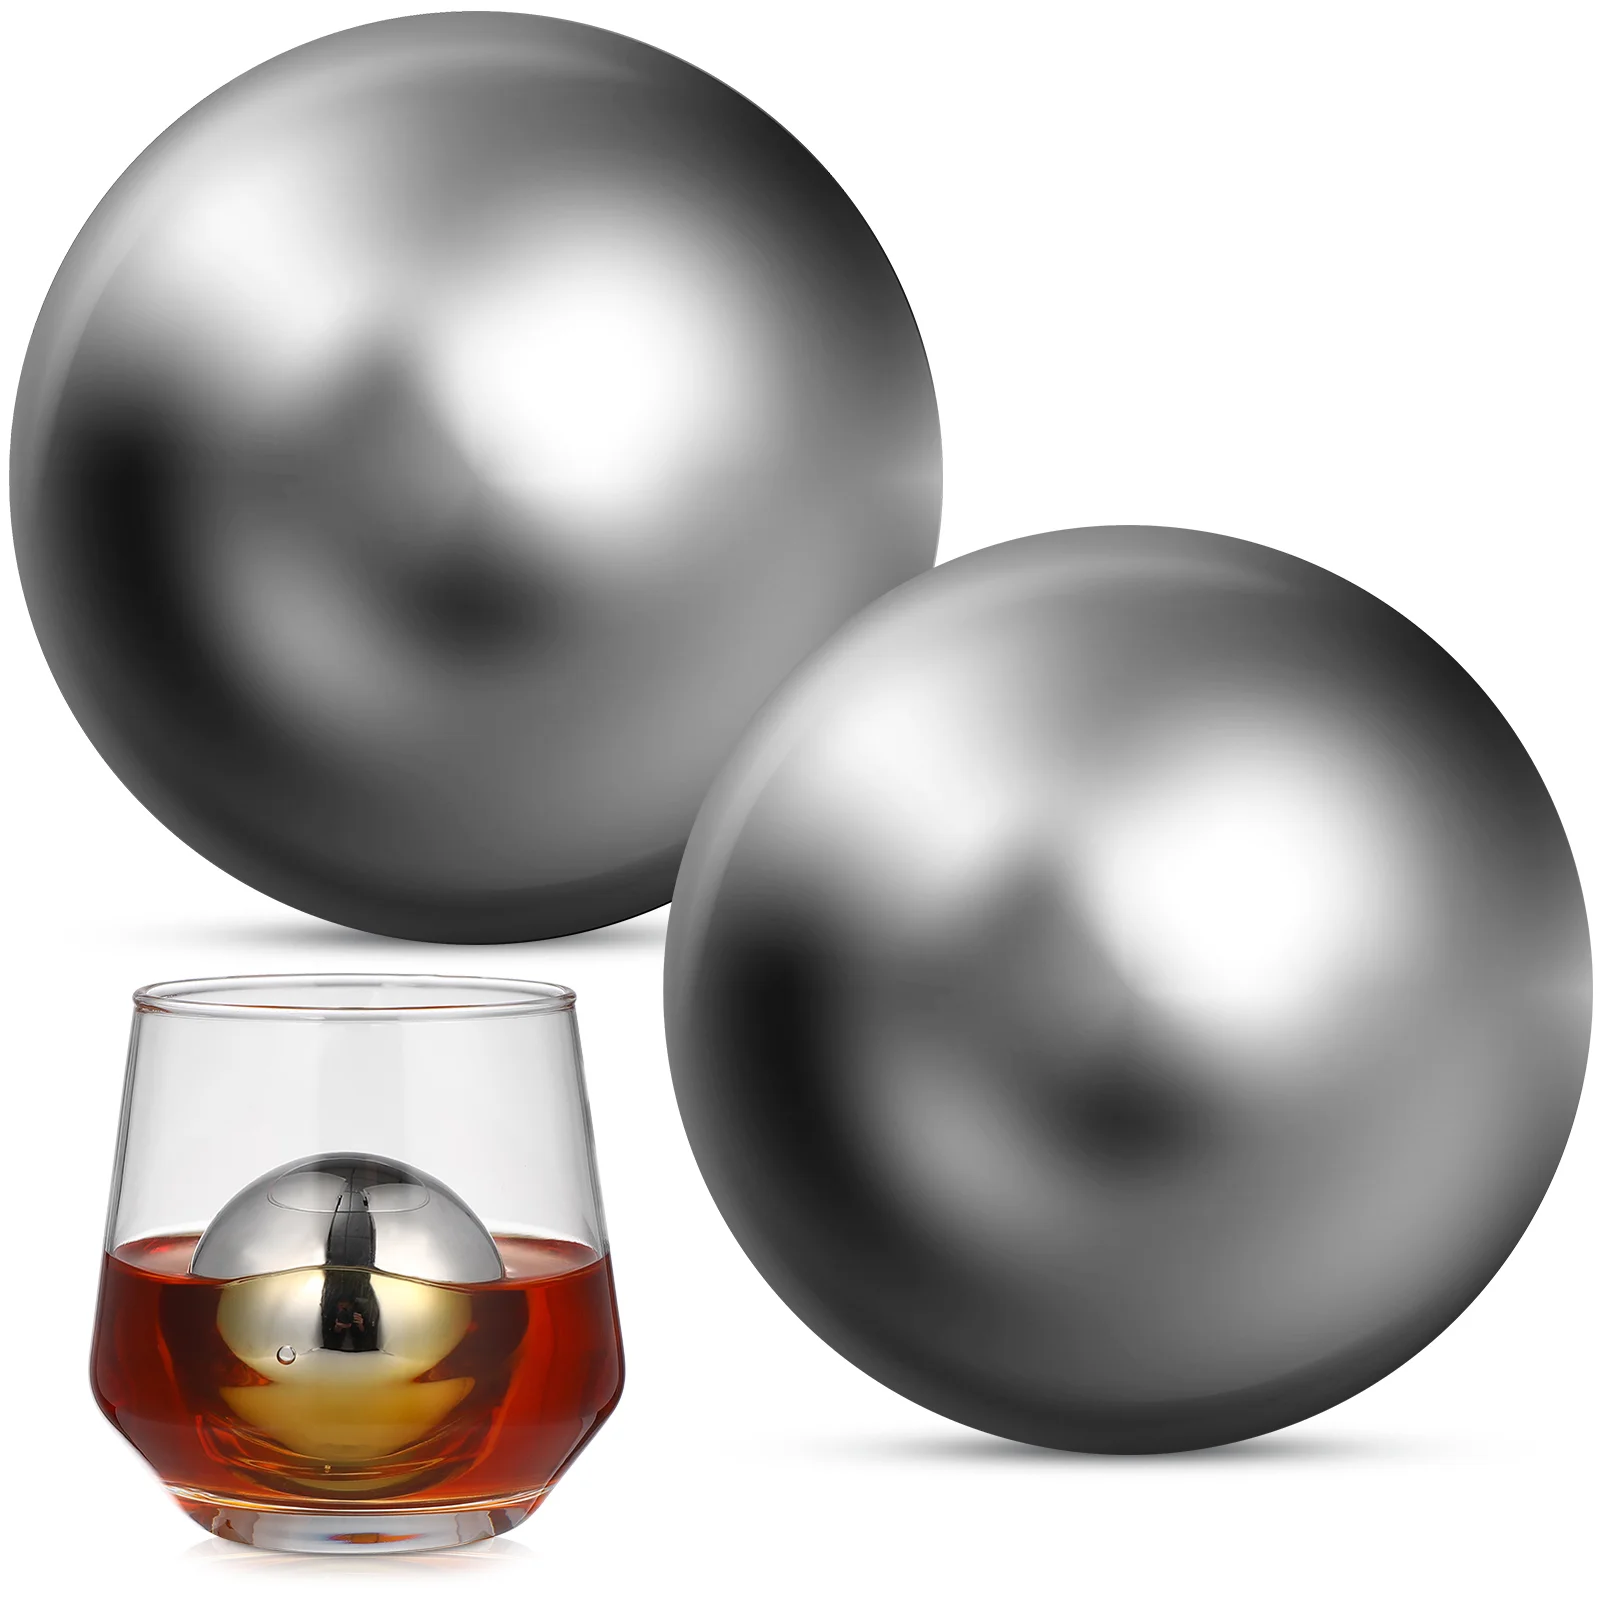 

2 Pcs Stainless Steel Ice Spheres Whiskey Balls Round Ice Cubes for Beverage